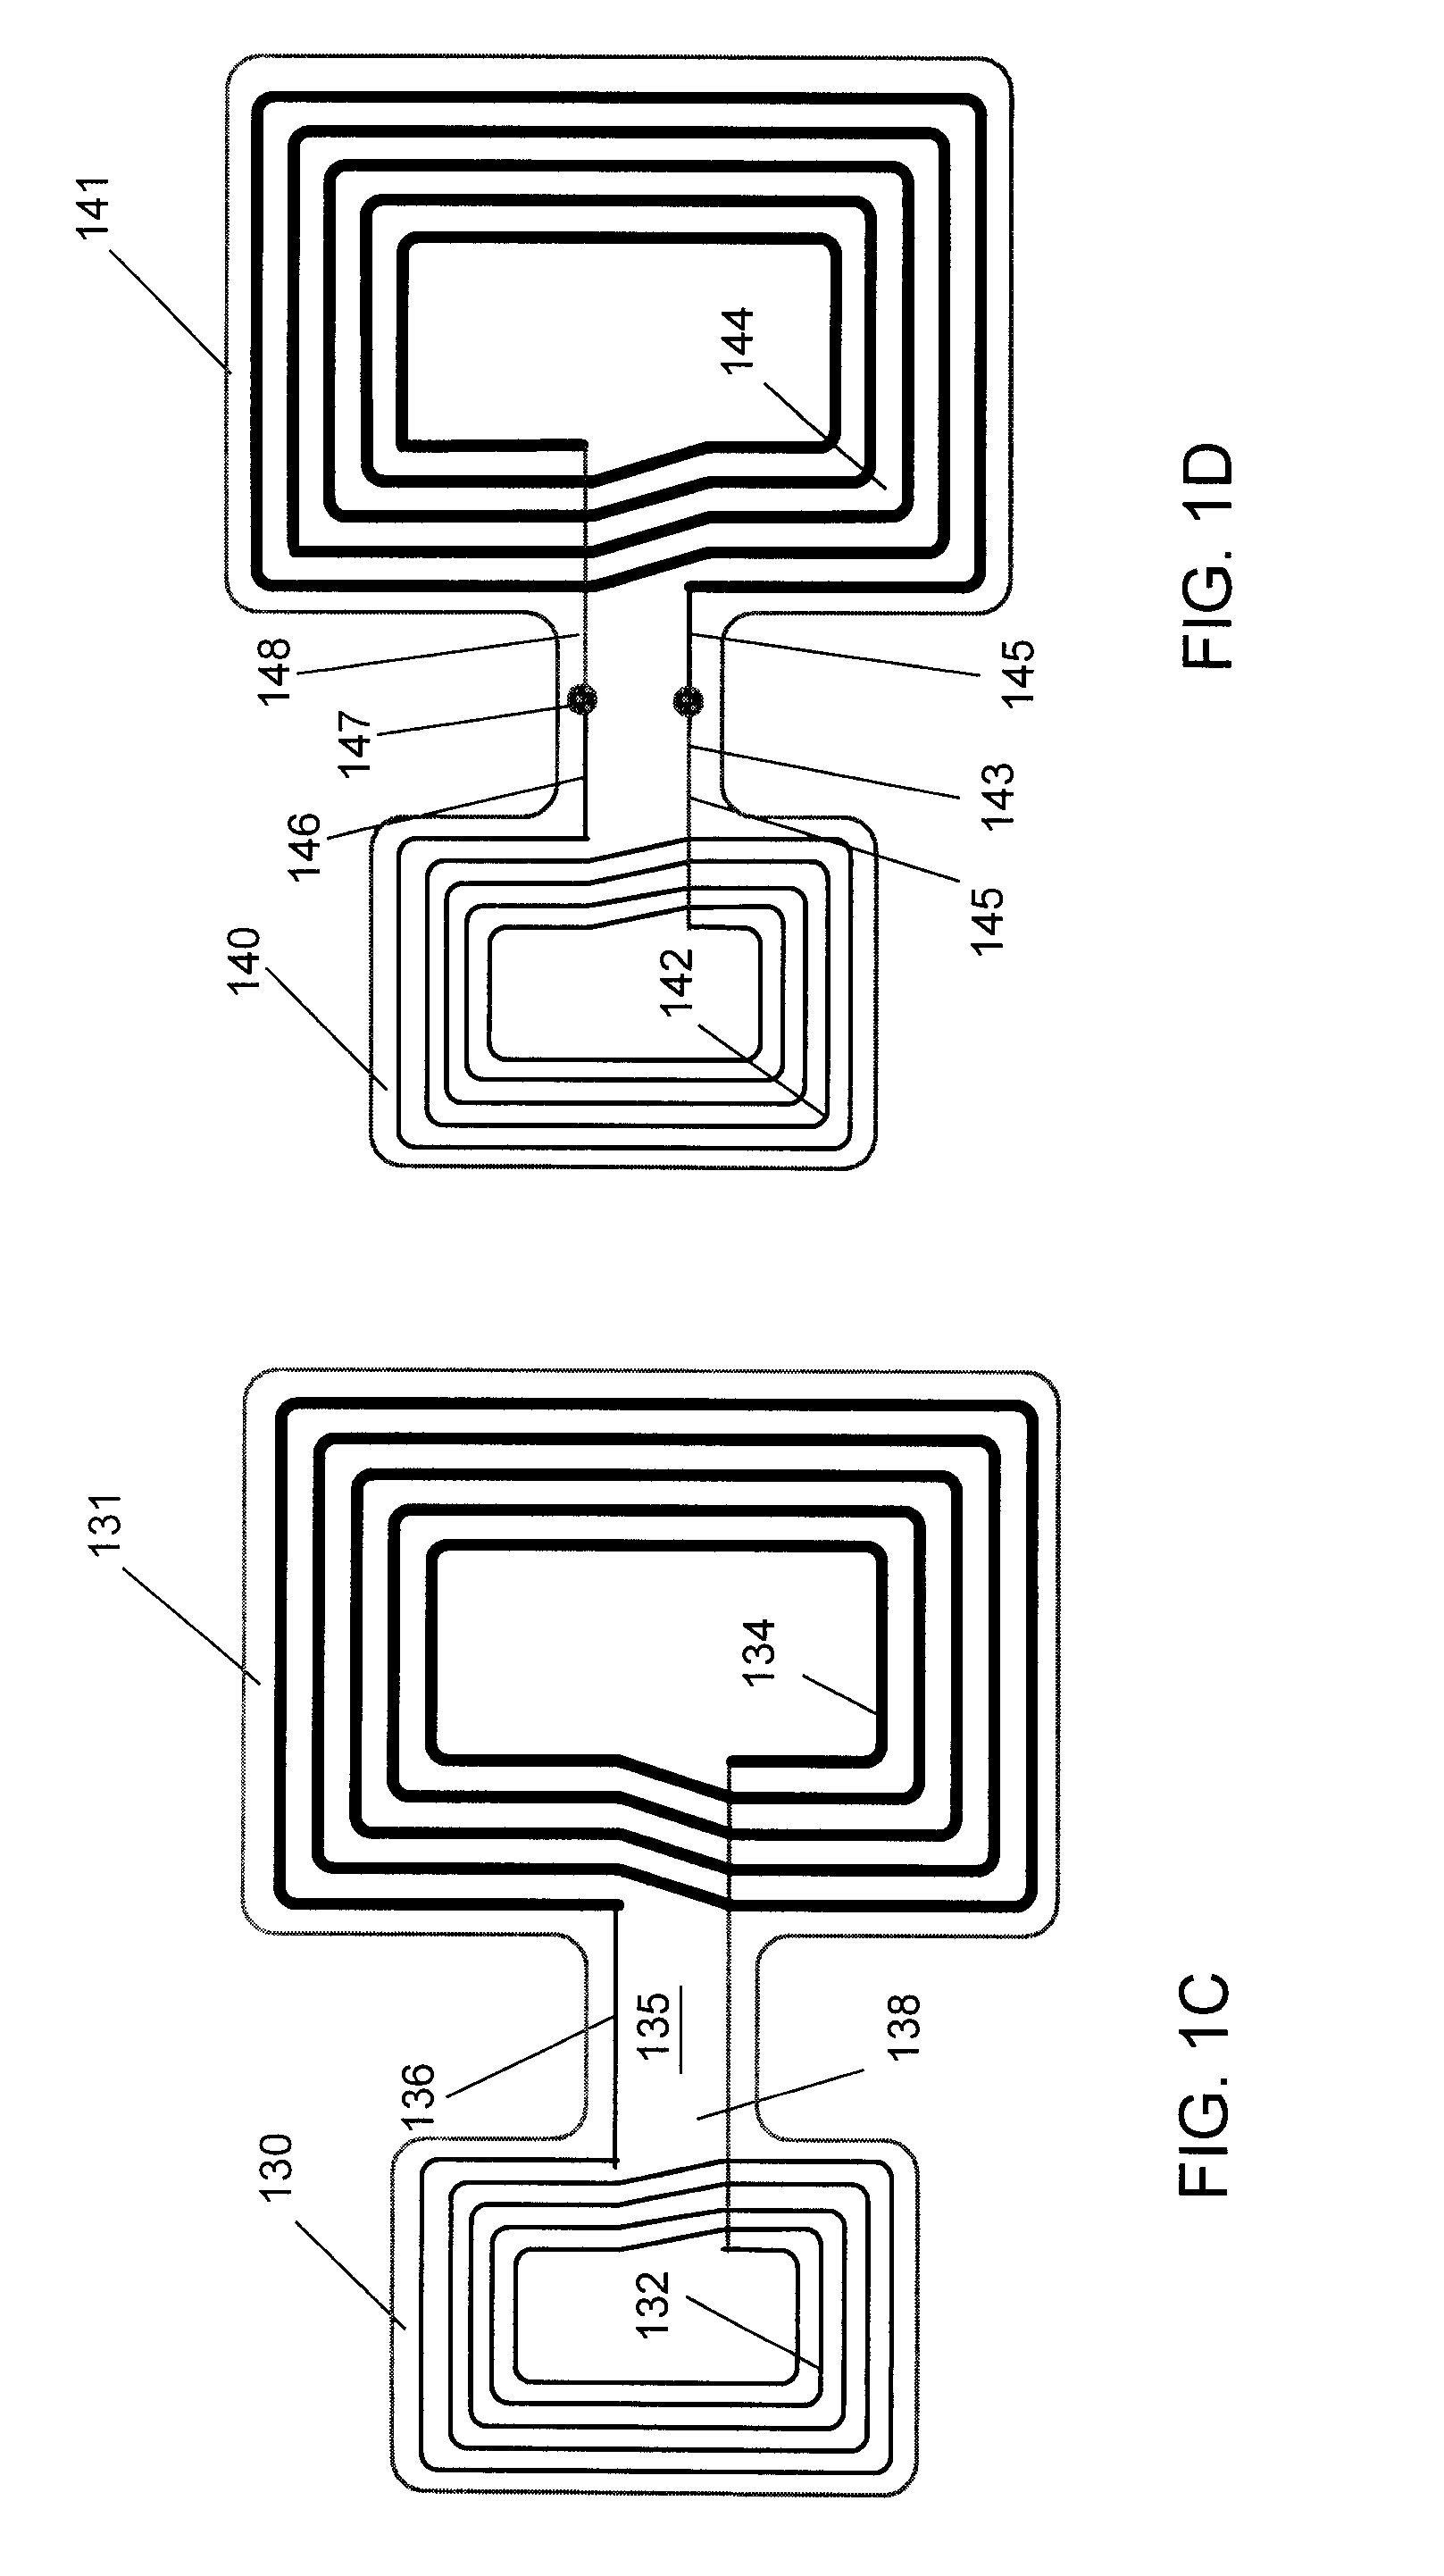 Systems and methods for enhancing the magnetic coupling in a wireless communication system